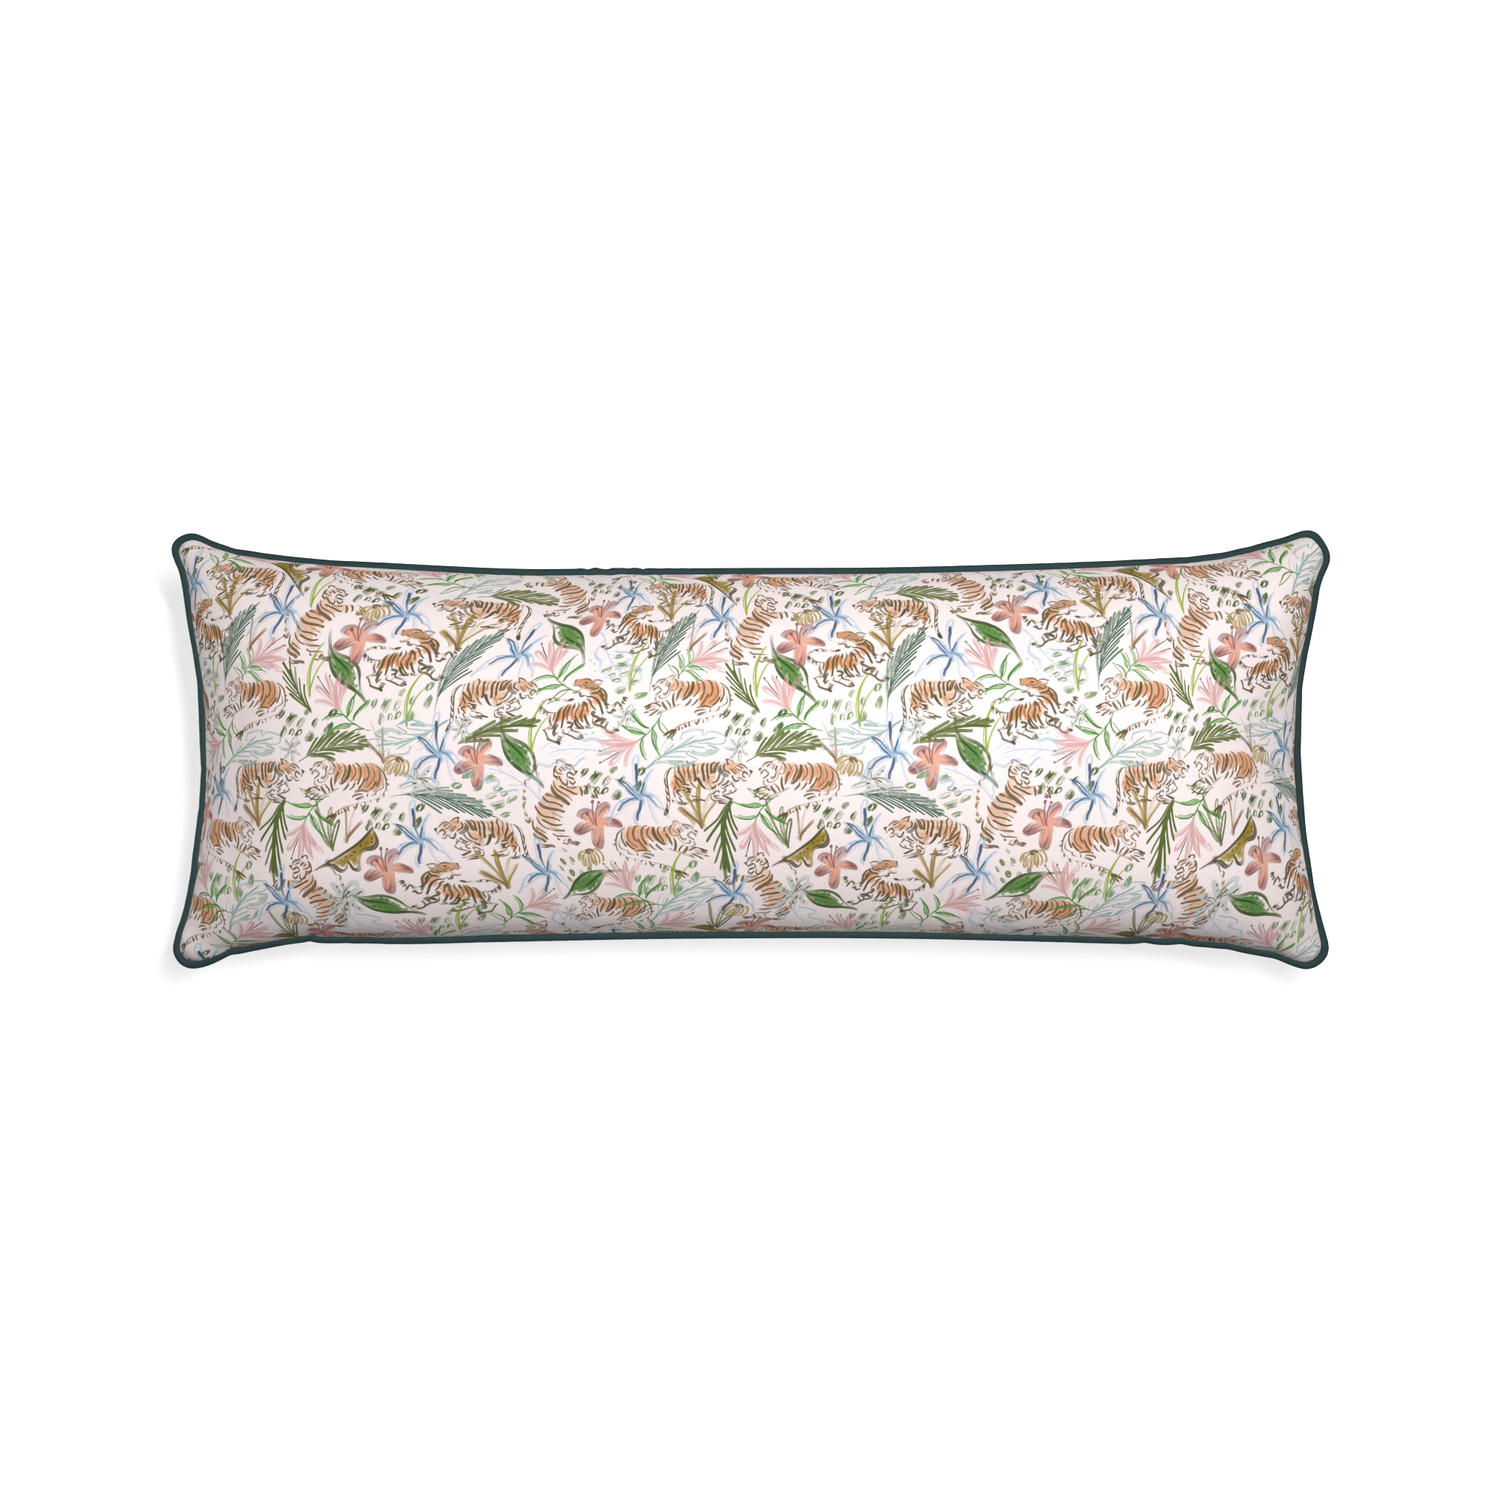 Xl-lumbar frida pink custom pink chinoiserie tigerpillow with p piping on white background